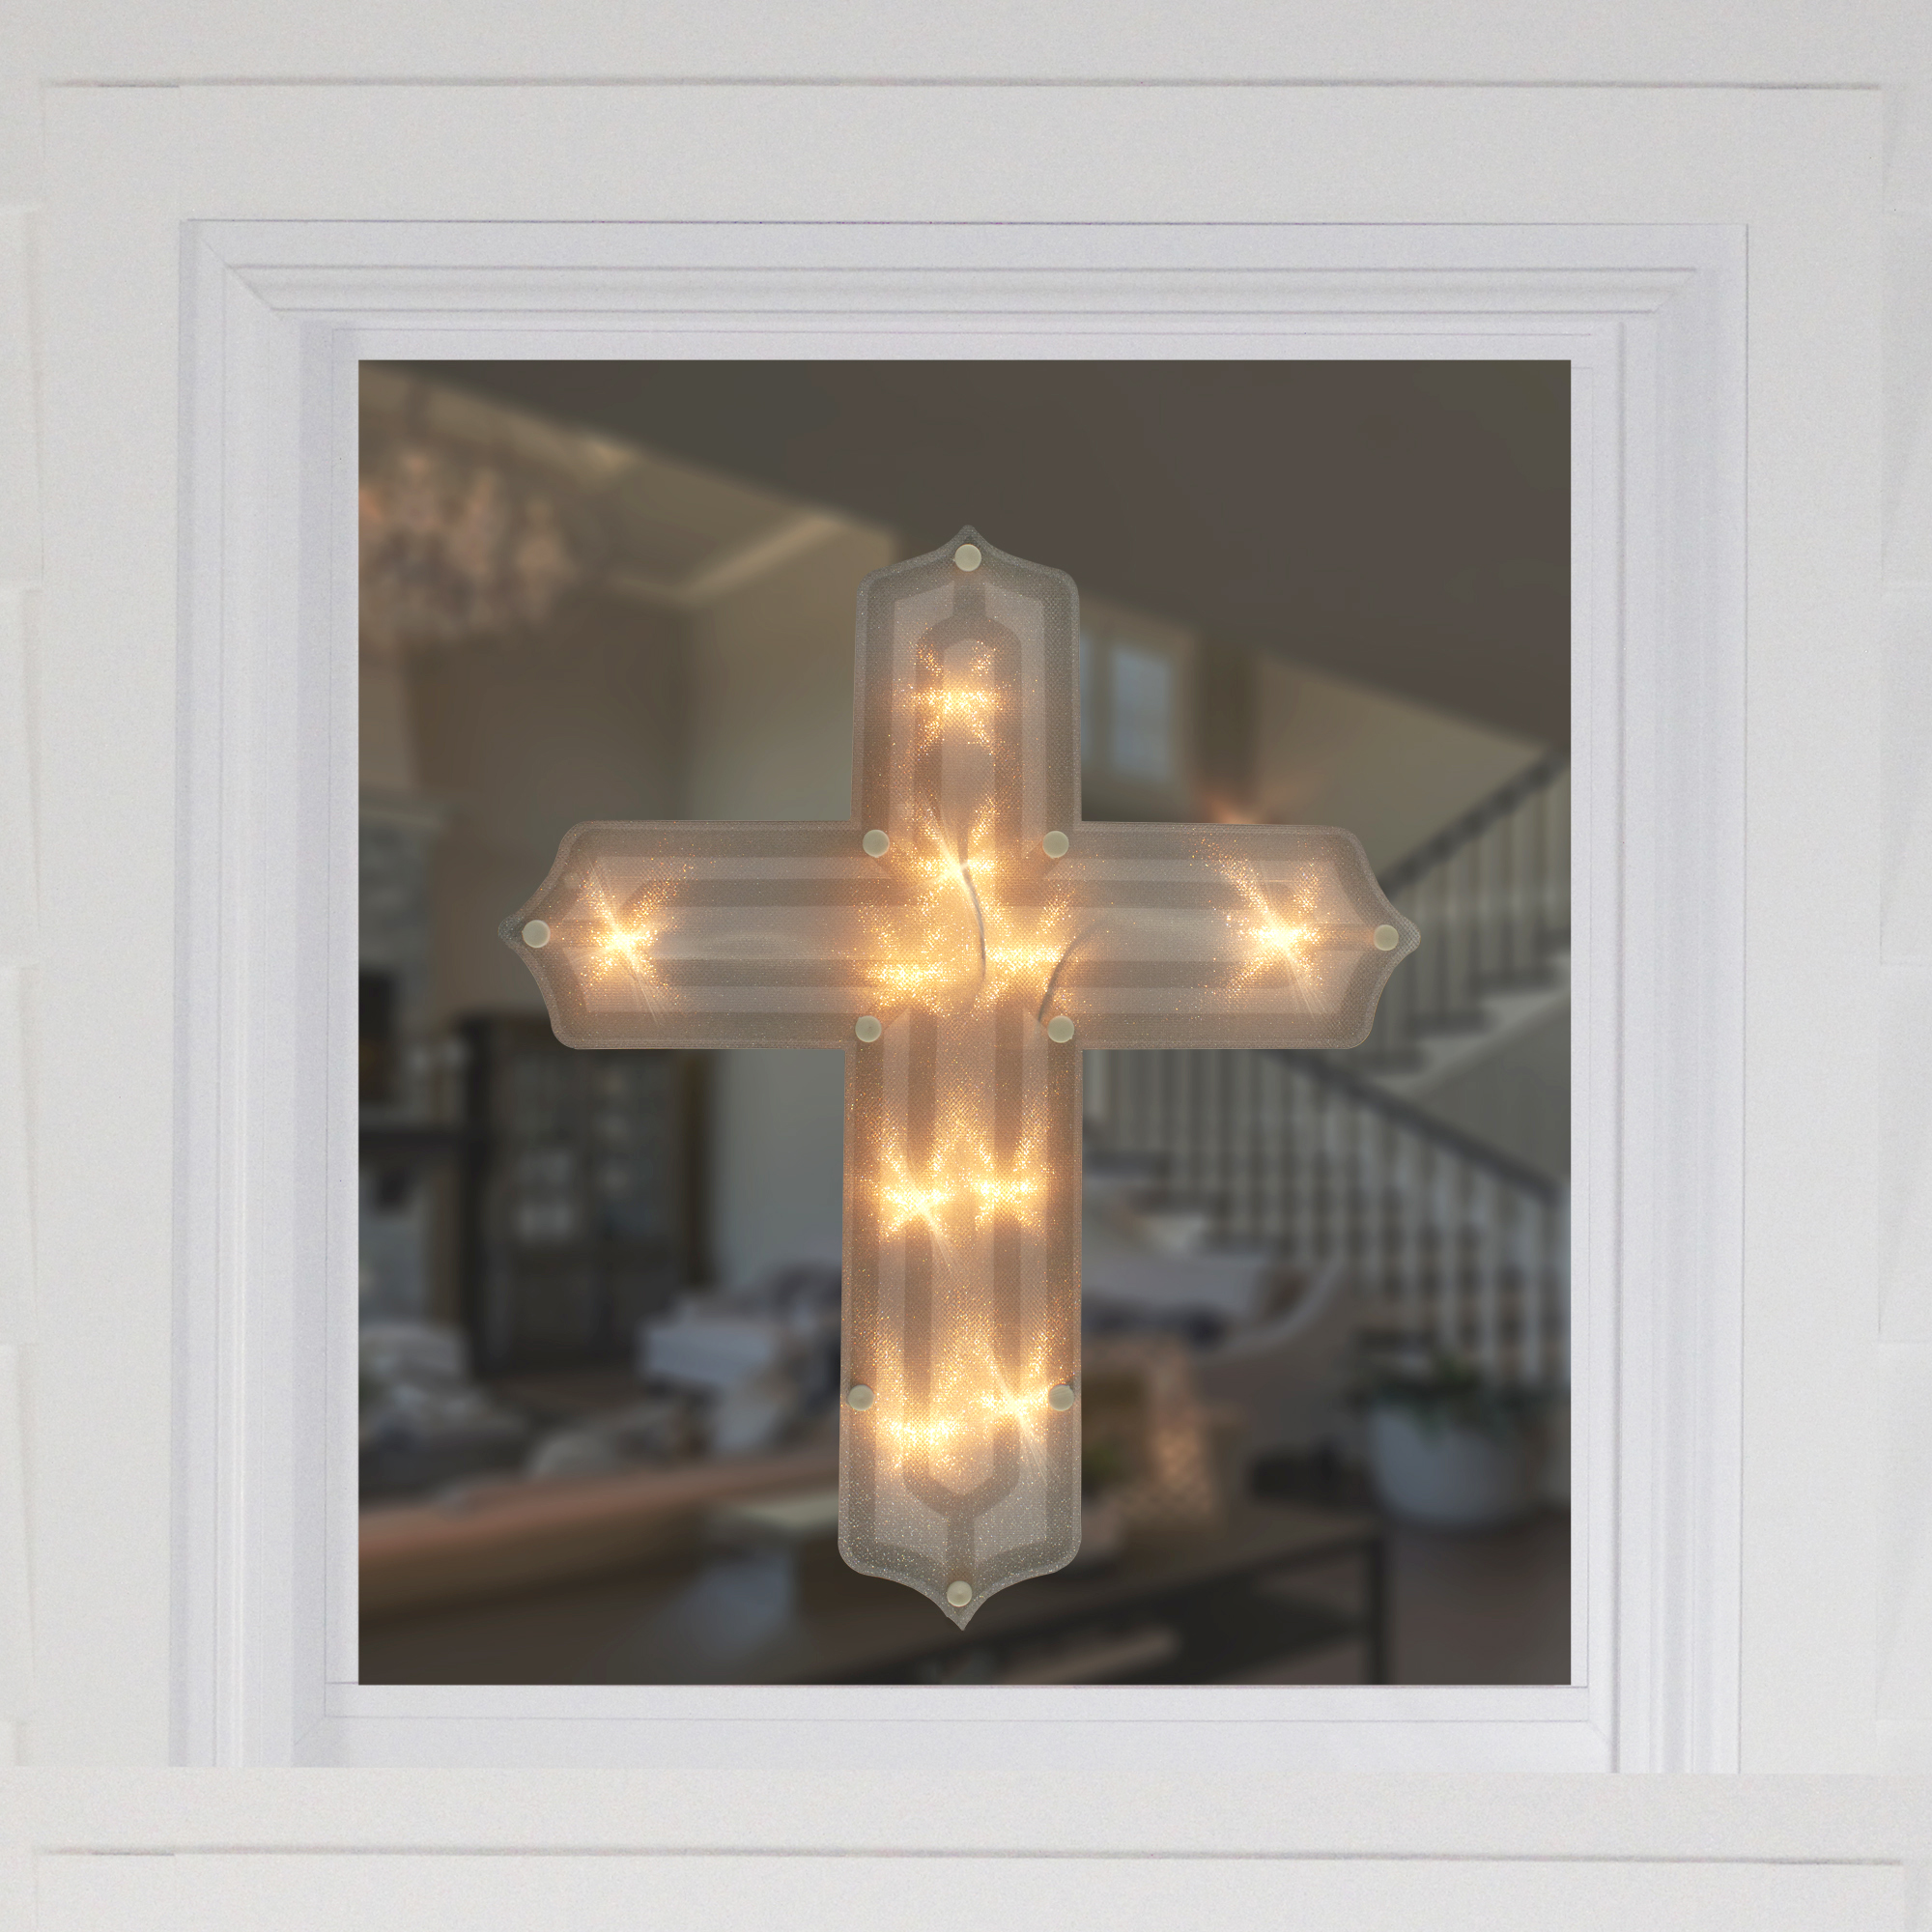 Northlight 14" Lighted Religious Cross Easter Window Silhouette Decoration